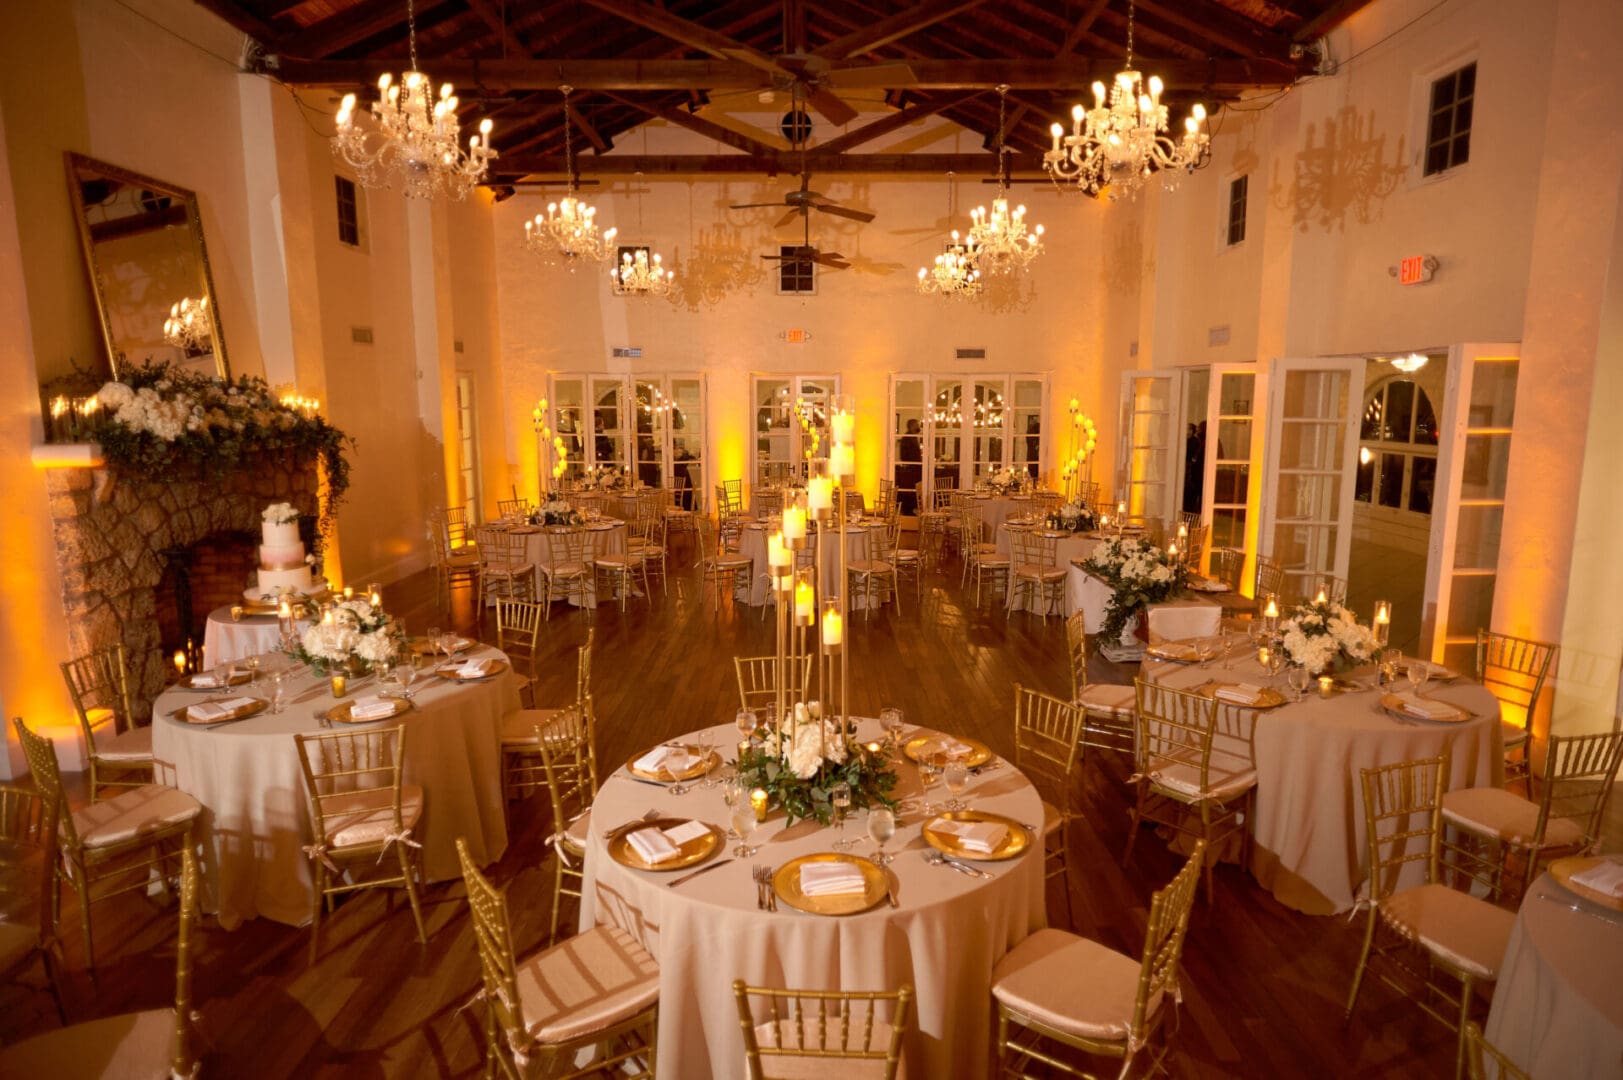 Elegant wedding reception hall with round tables set for dinner, floral centerpieces, and chandeliers hanging from a wood-beamed ceiling, warmly lit.